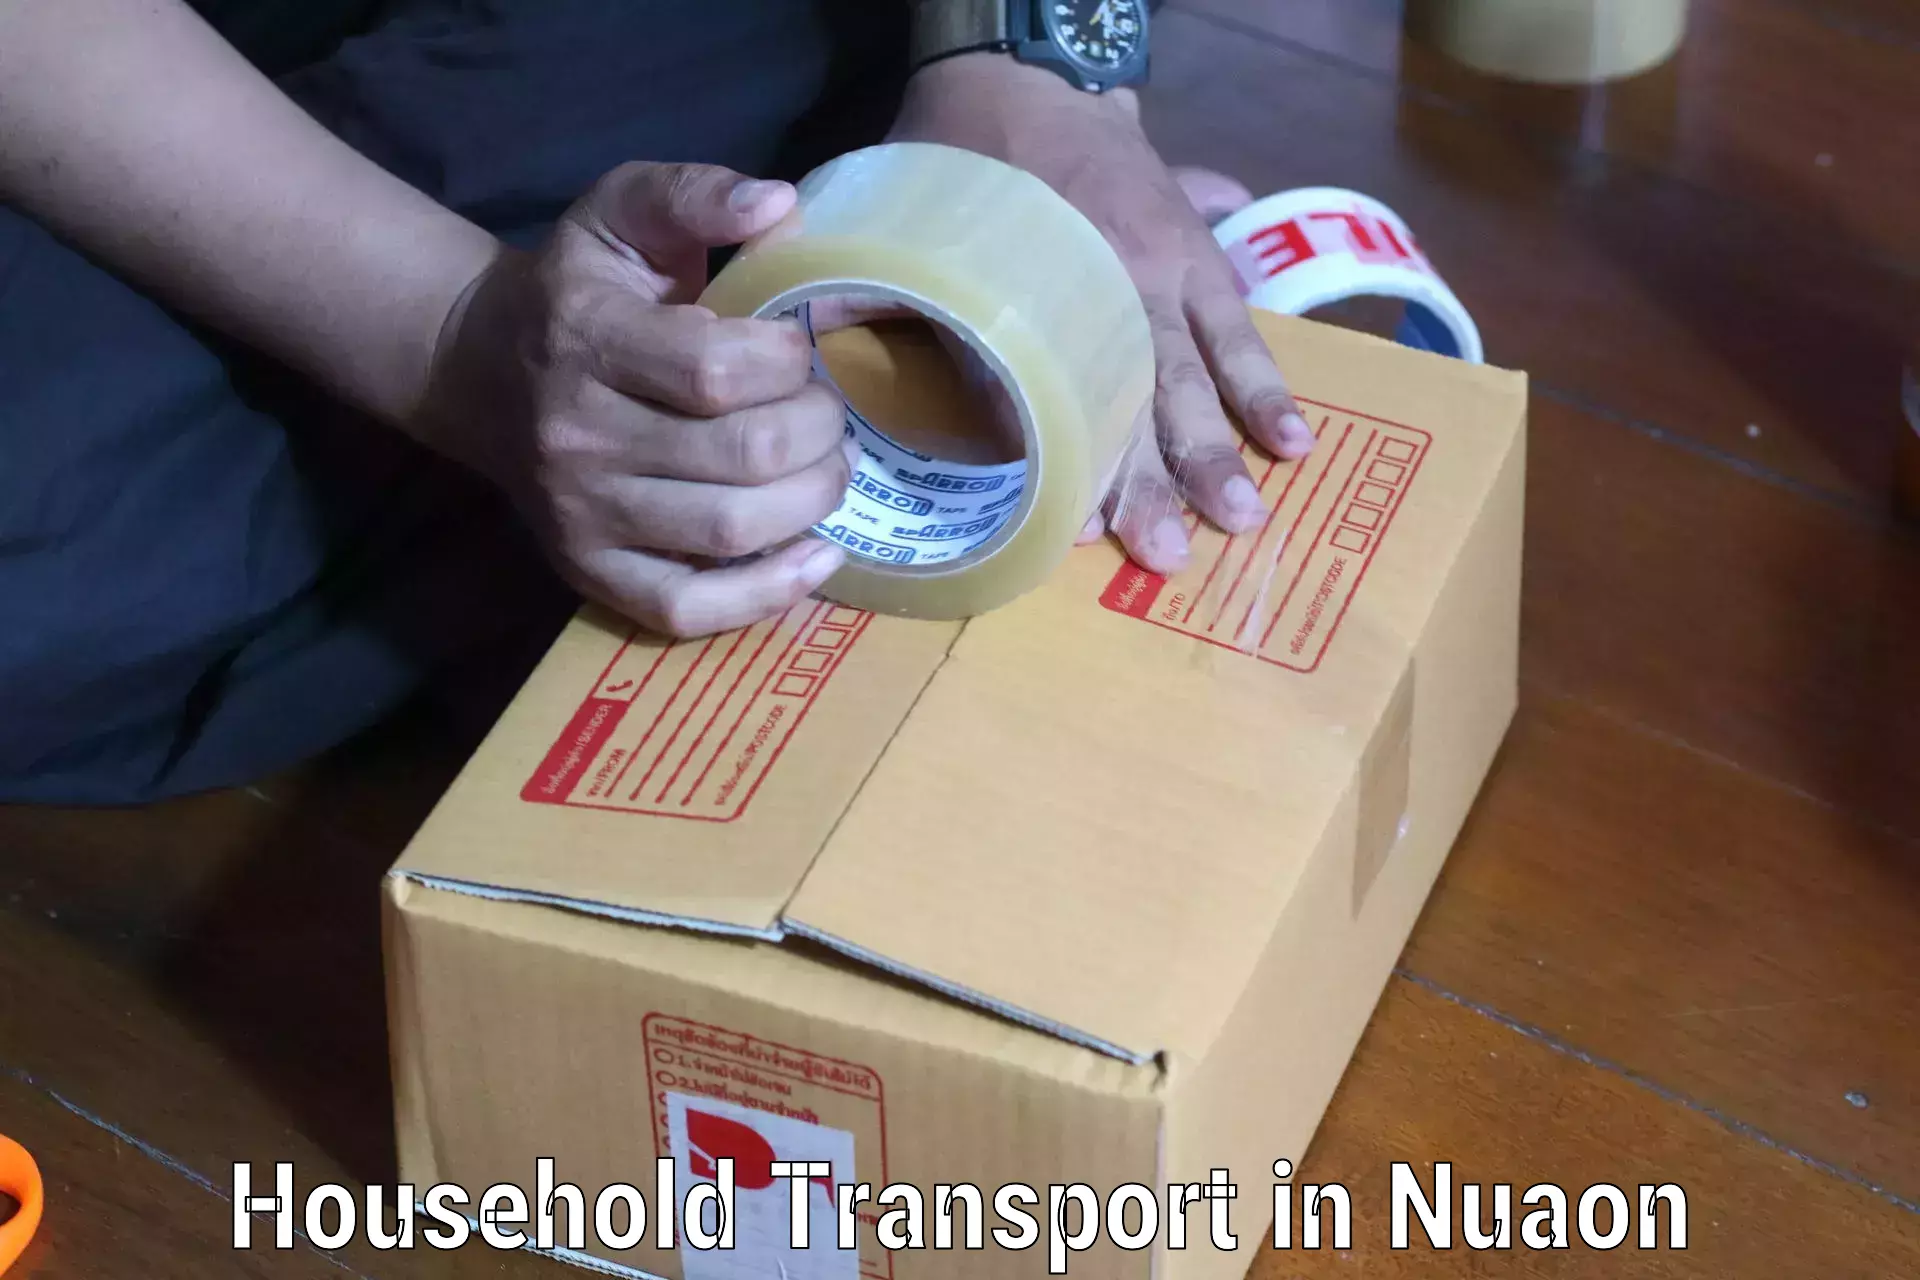 Reliable furniture transport in Nuaon